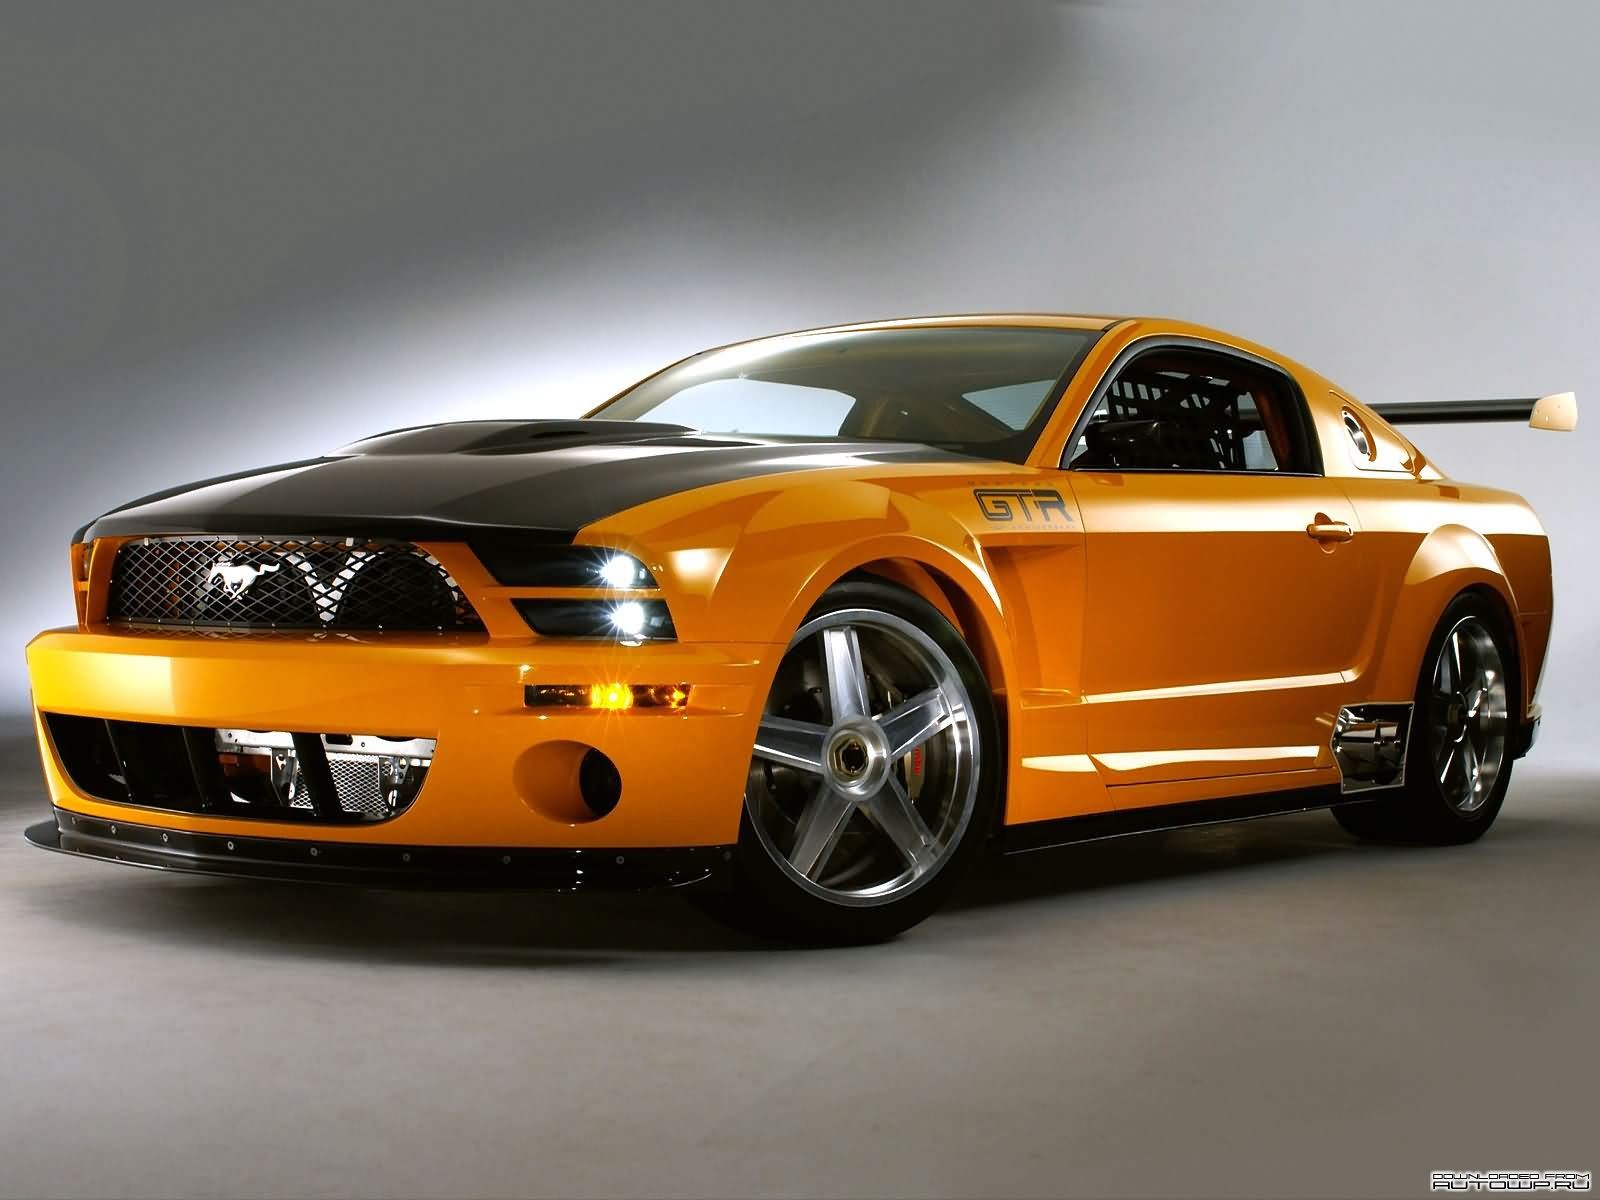 General 1600x1200 car Ford Mustang Ford vehicle orange cars Ford Mustang S-197 muscle cars American cars